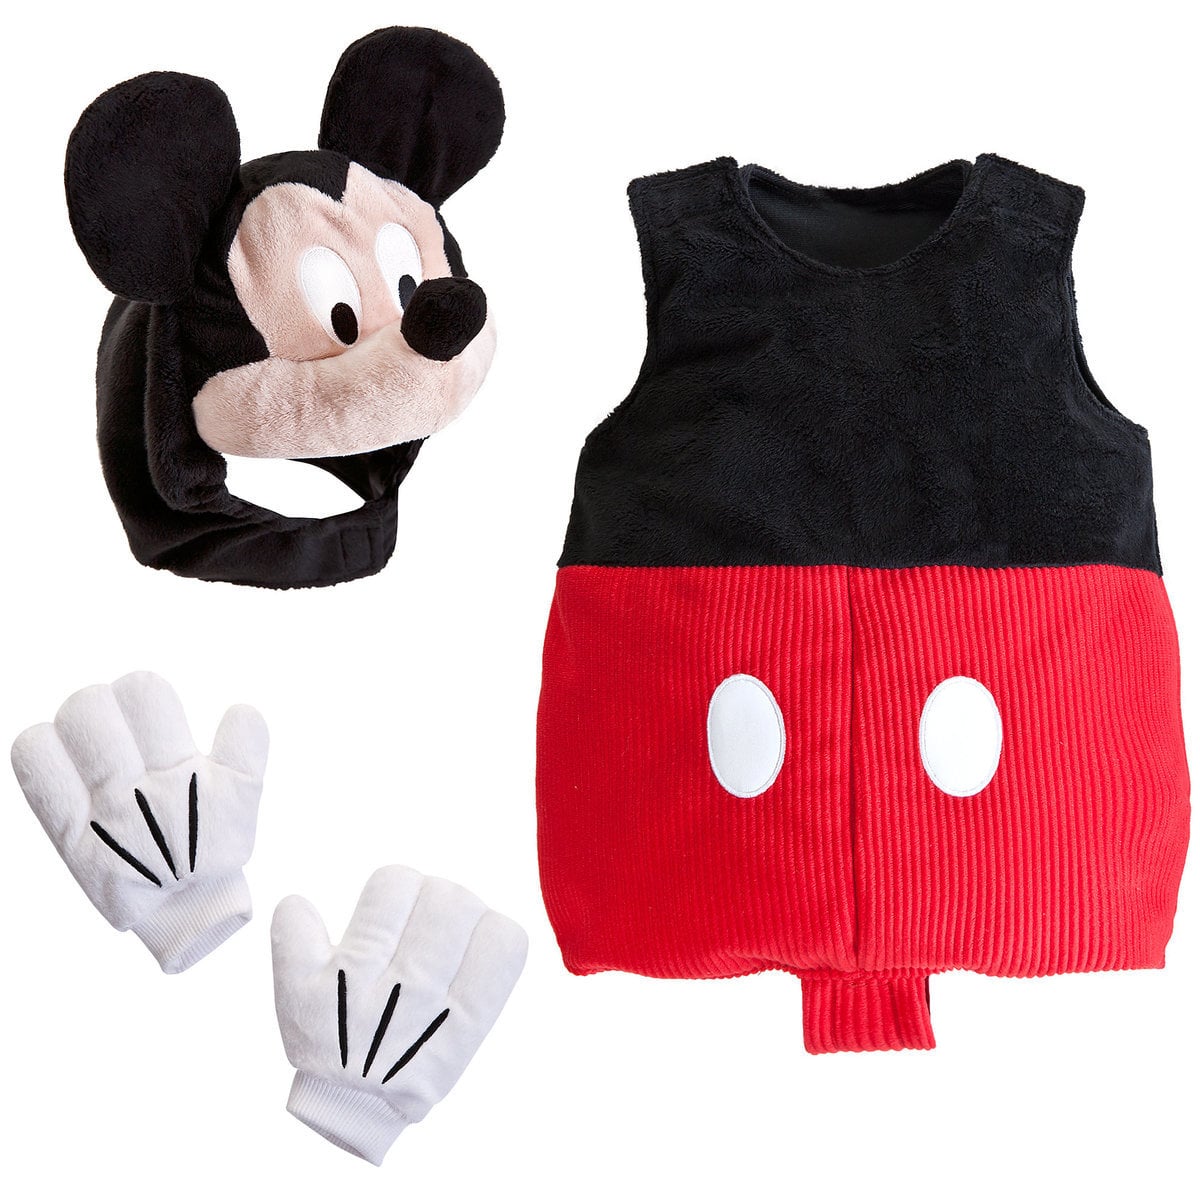 Top 25 Disney Gift Ideas for Babies featured by top US Disney blogger, Marcie and the Mouse: Mickey Mouse costume for babies